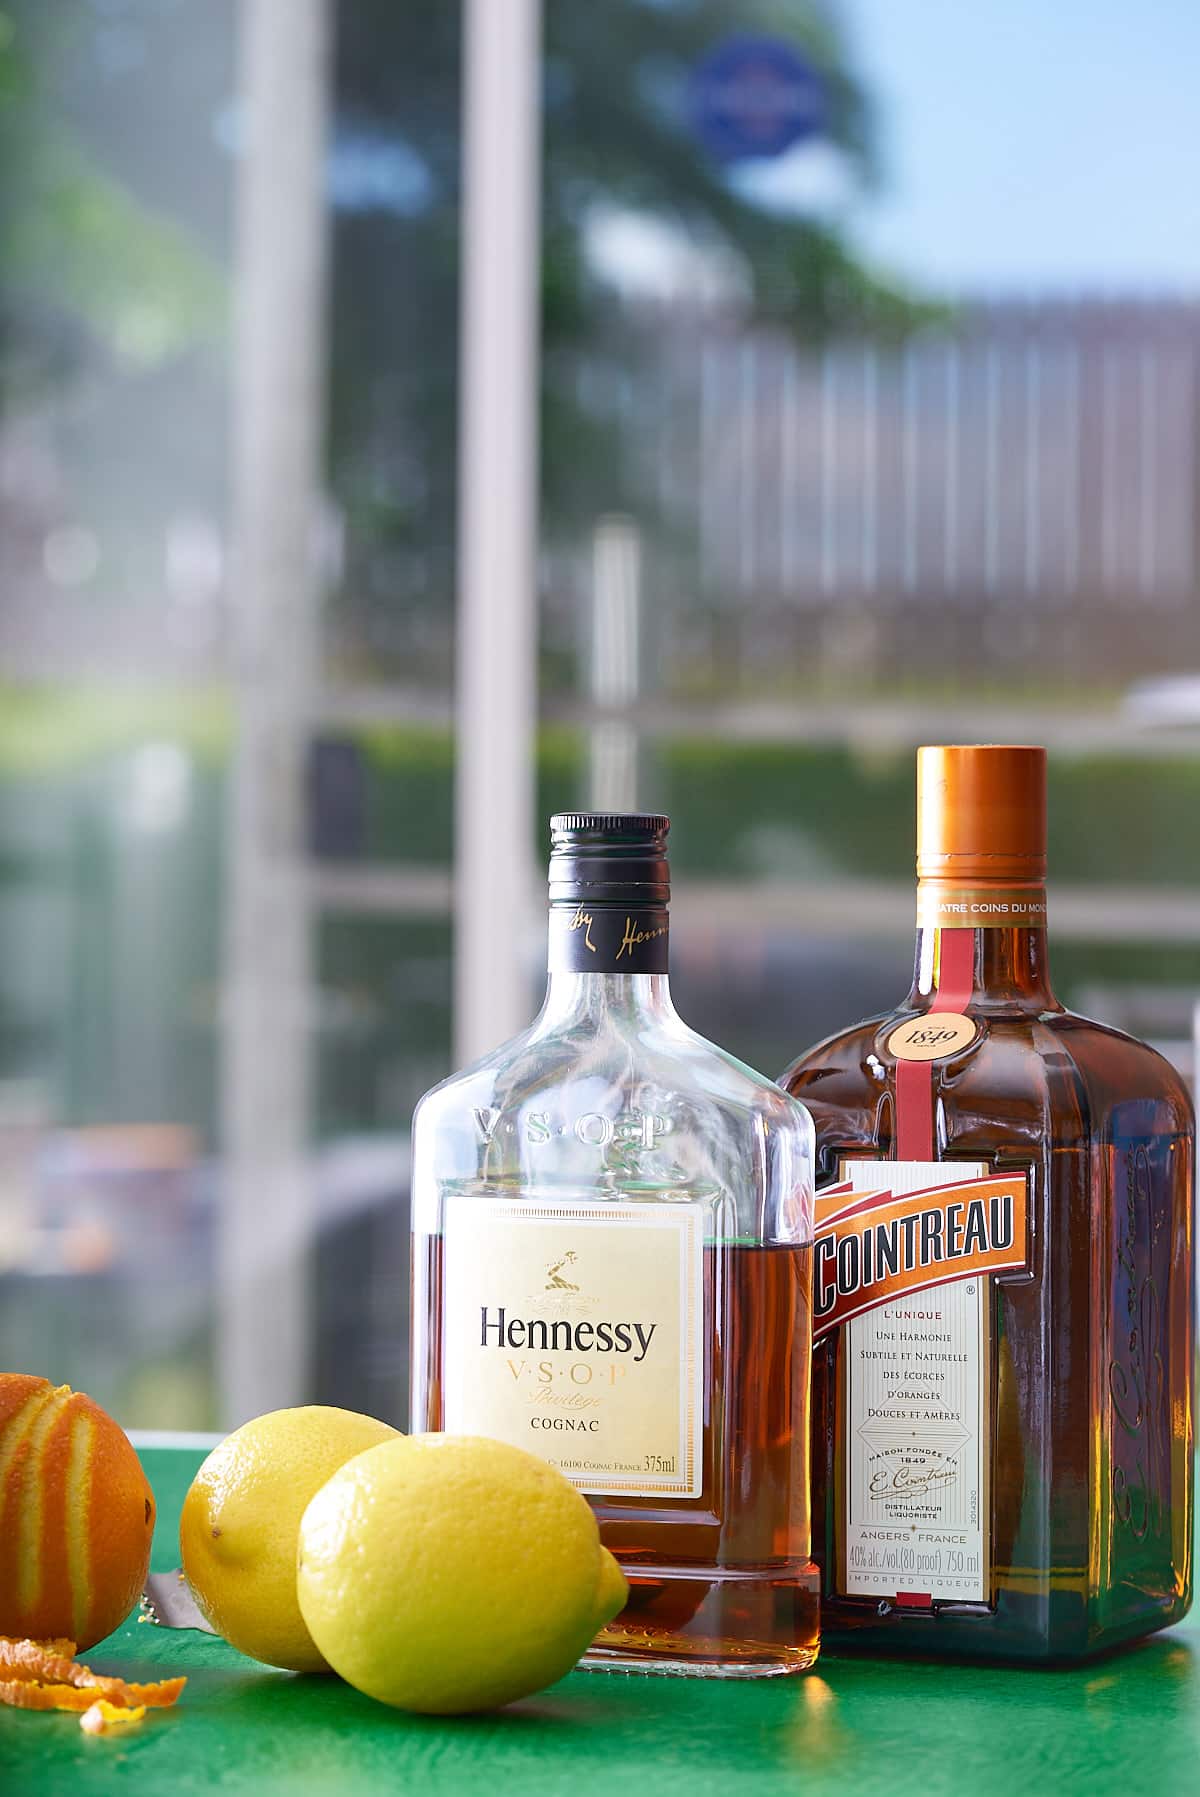 Hennessy sidecar cocktail ingredients